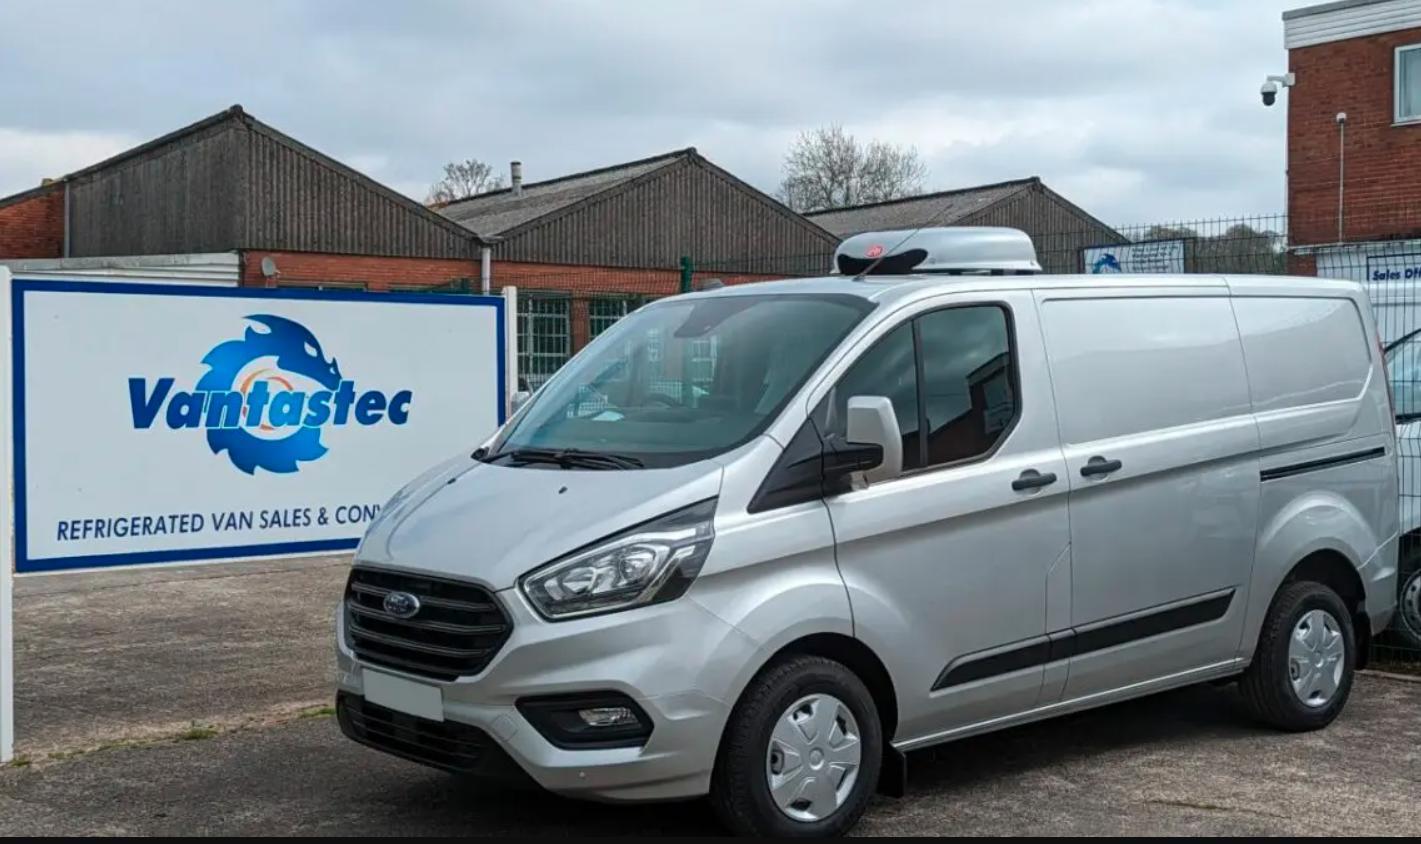 Van conversion firm acquired by EOT